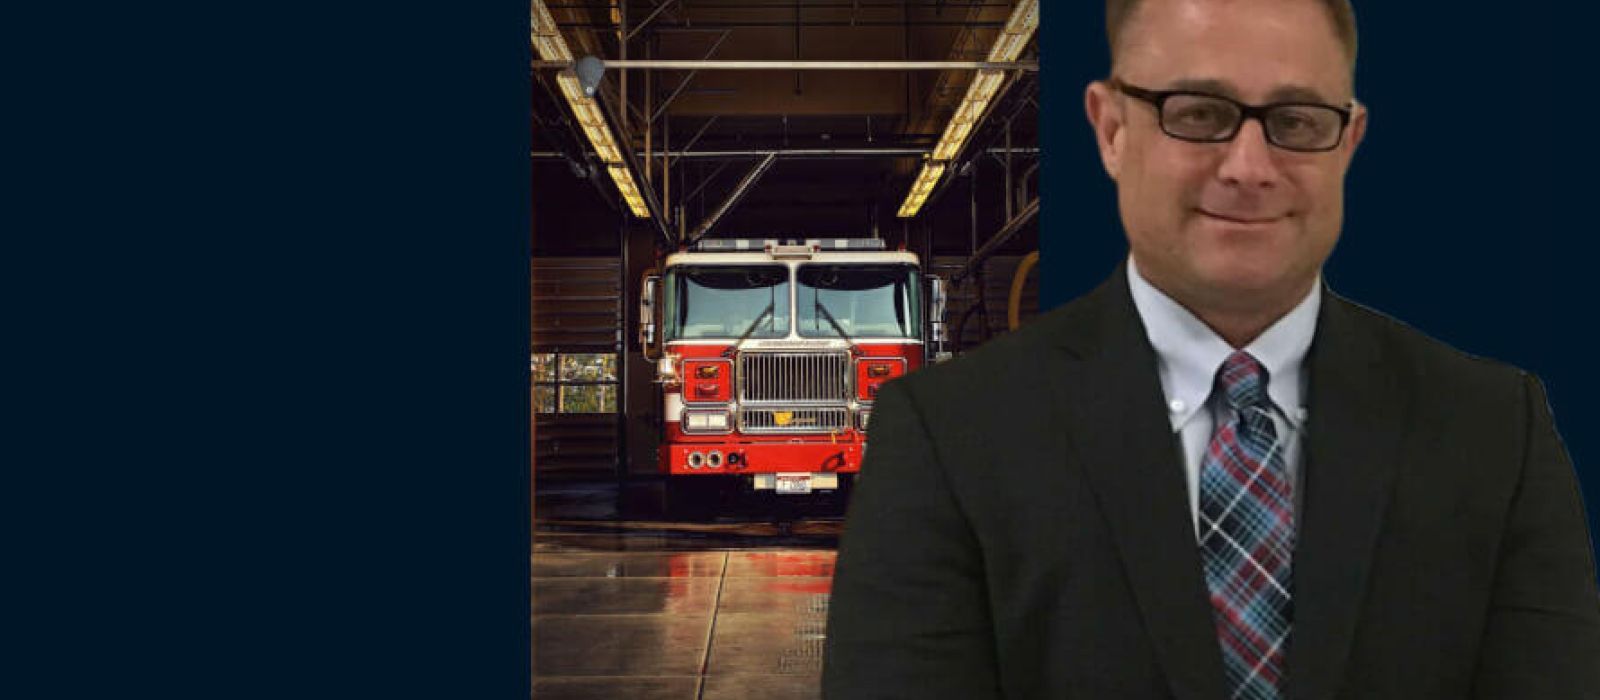 Fire truck accident lawyers in Los Angeles, CA